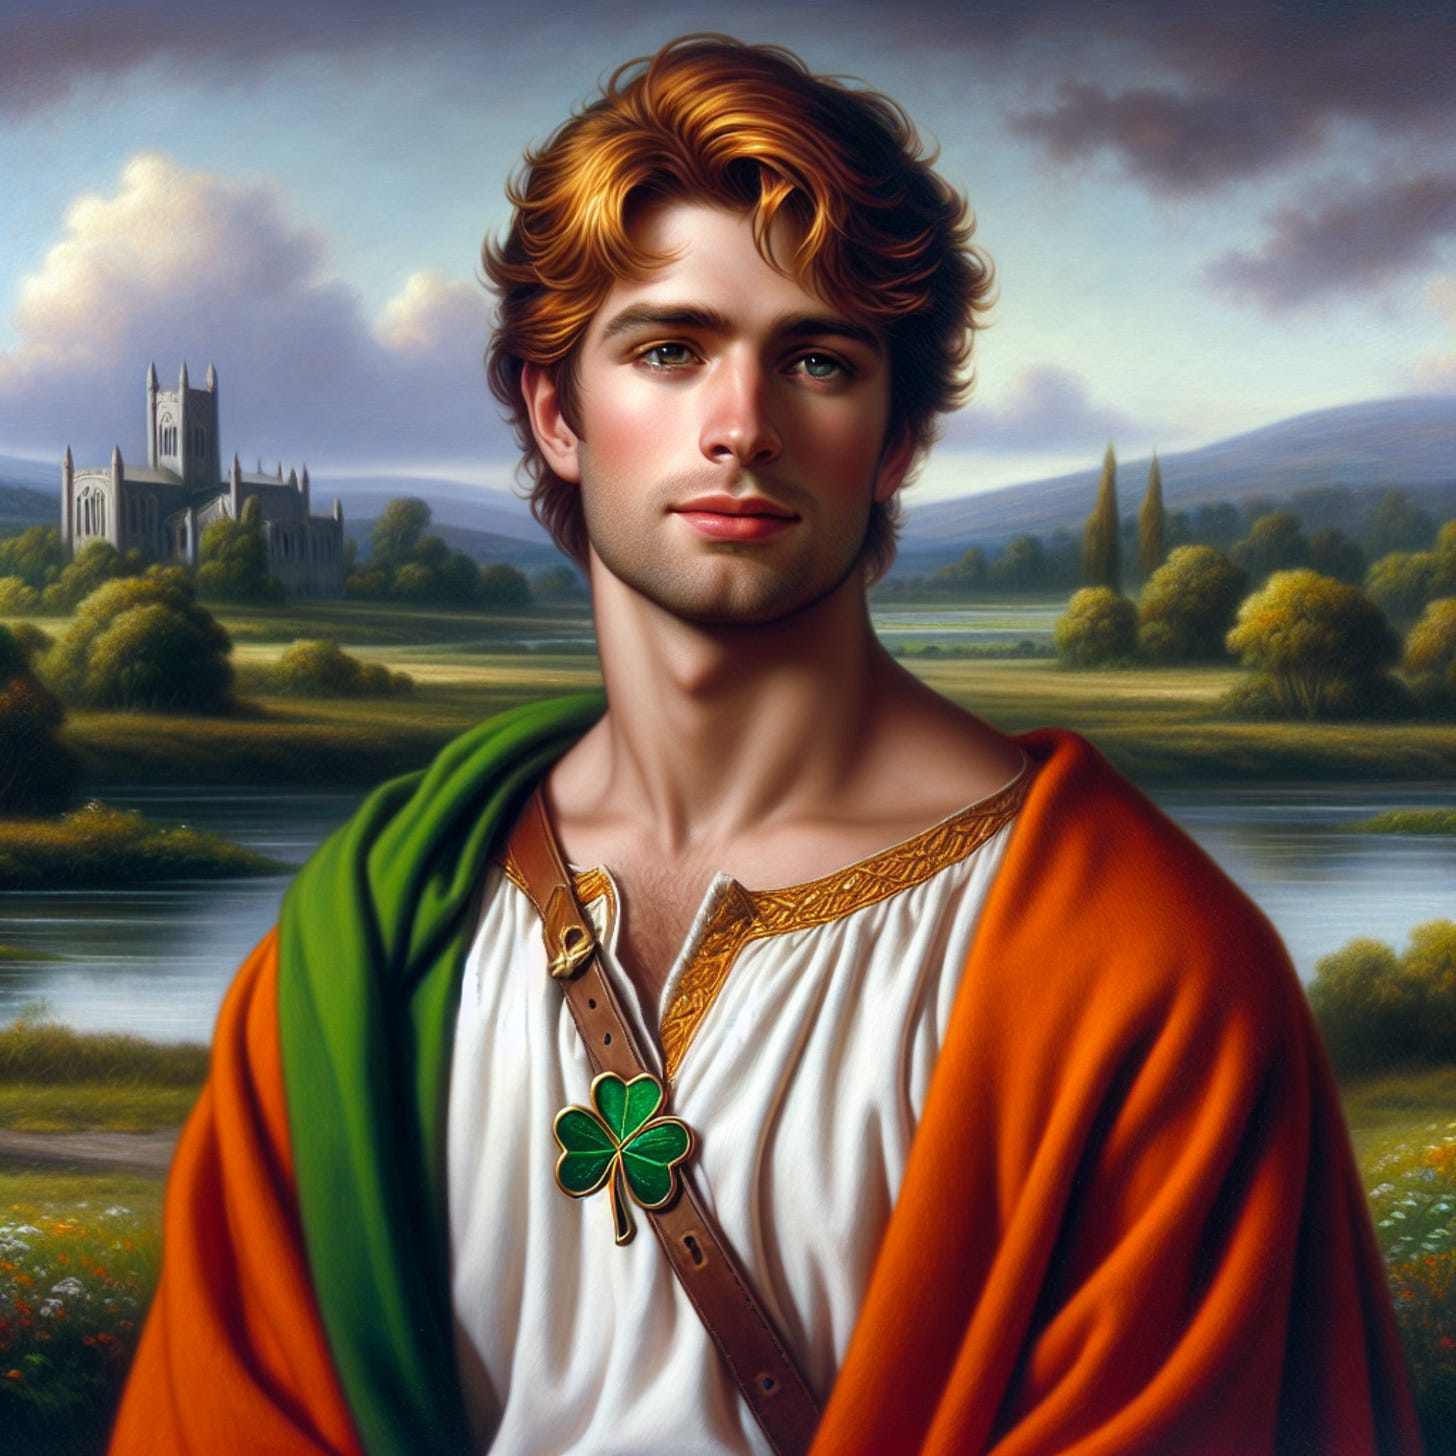 The image presents a romantic and idealized portrait of a man who could be interpreted as a young Saint Patrick, the patron saint of Ireland. He is depicted with a serene expression, gazing into the distance. His features are classical, with a chiseled jaw, a straight nose, and deep, piercing blue eyes that seem to reflect a sense of purpose and calm intelligence. His hair is a rich auburn, with soft waves that fall to his shoulders, suggesting a youthful vigor and a touch of nobility.  He is adorned in a period-appropriate white tunic with ornate golden embroidery along the neckline, adding a touch of elegance and possibly indicating a status of religious or social distinction. Draped over his shoulders is a cloak with a dual color scheme: a rich, emerald green on the inside, symbolizing Ireland’s verdant landscape, and a bold orange on the outside, which could be seen as representing the fire of the faith he spread across Ireland.  The brown leather strap crossing his torso is both functional and symbolic, holding his cloak in place and featuring a brooch that is unmistakably a three-leaf shamrock clover, widely recognized as a symbol used to explain the concept of the Holy Trinity.  Set against a bucolic backdrop, the scene includes a river reflecting the sky, lush greenery, and a distant cathedral with gothic spires, all bathed in a soft, diffused light that suggests a divine presence or blessing. The cathedral may represent the Christian faith that Saint Patrick is credited with spreading throughout Ireland, and the peaceful landscape could be symbolic of the tranquil state of the soul at harmony with faith and nature.